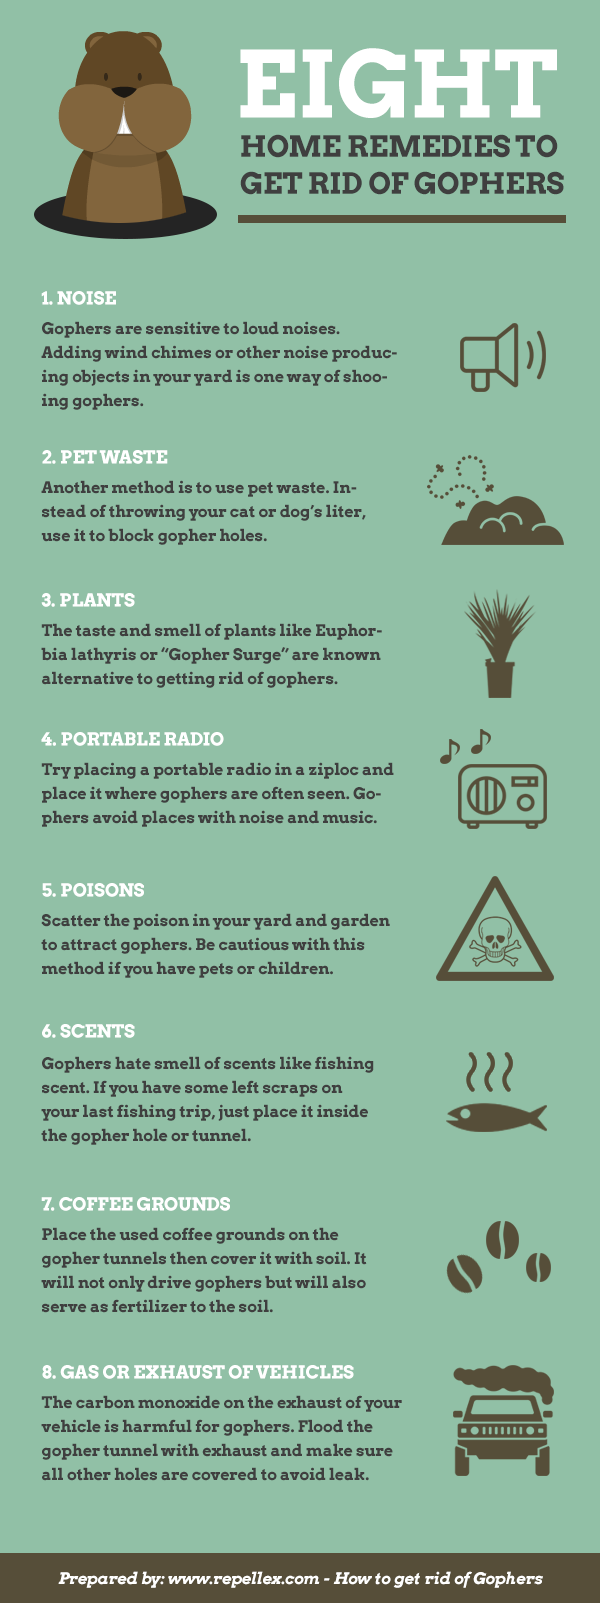 effective methods for eliminating moles and gophers from your yard